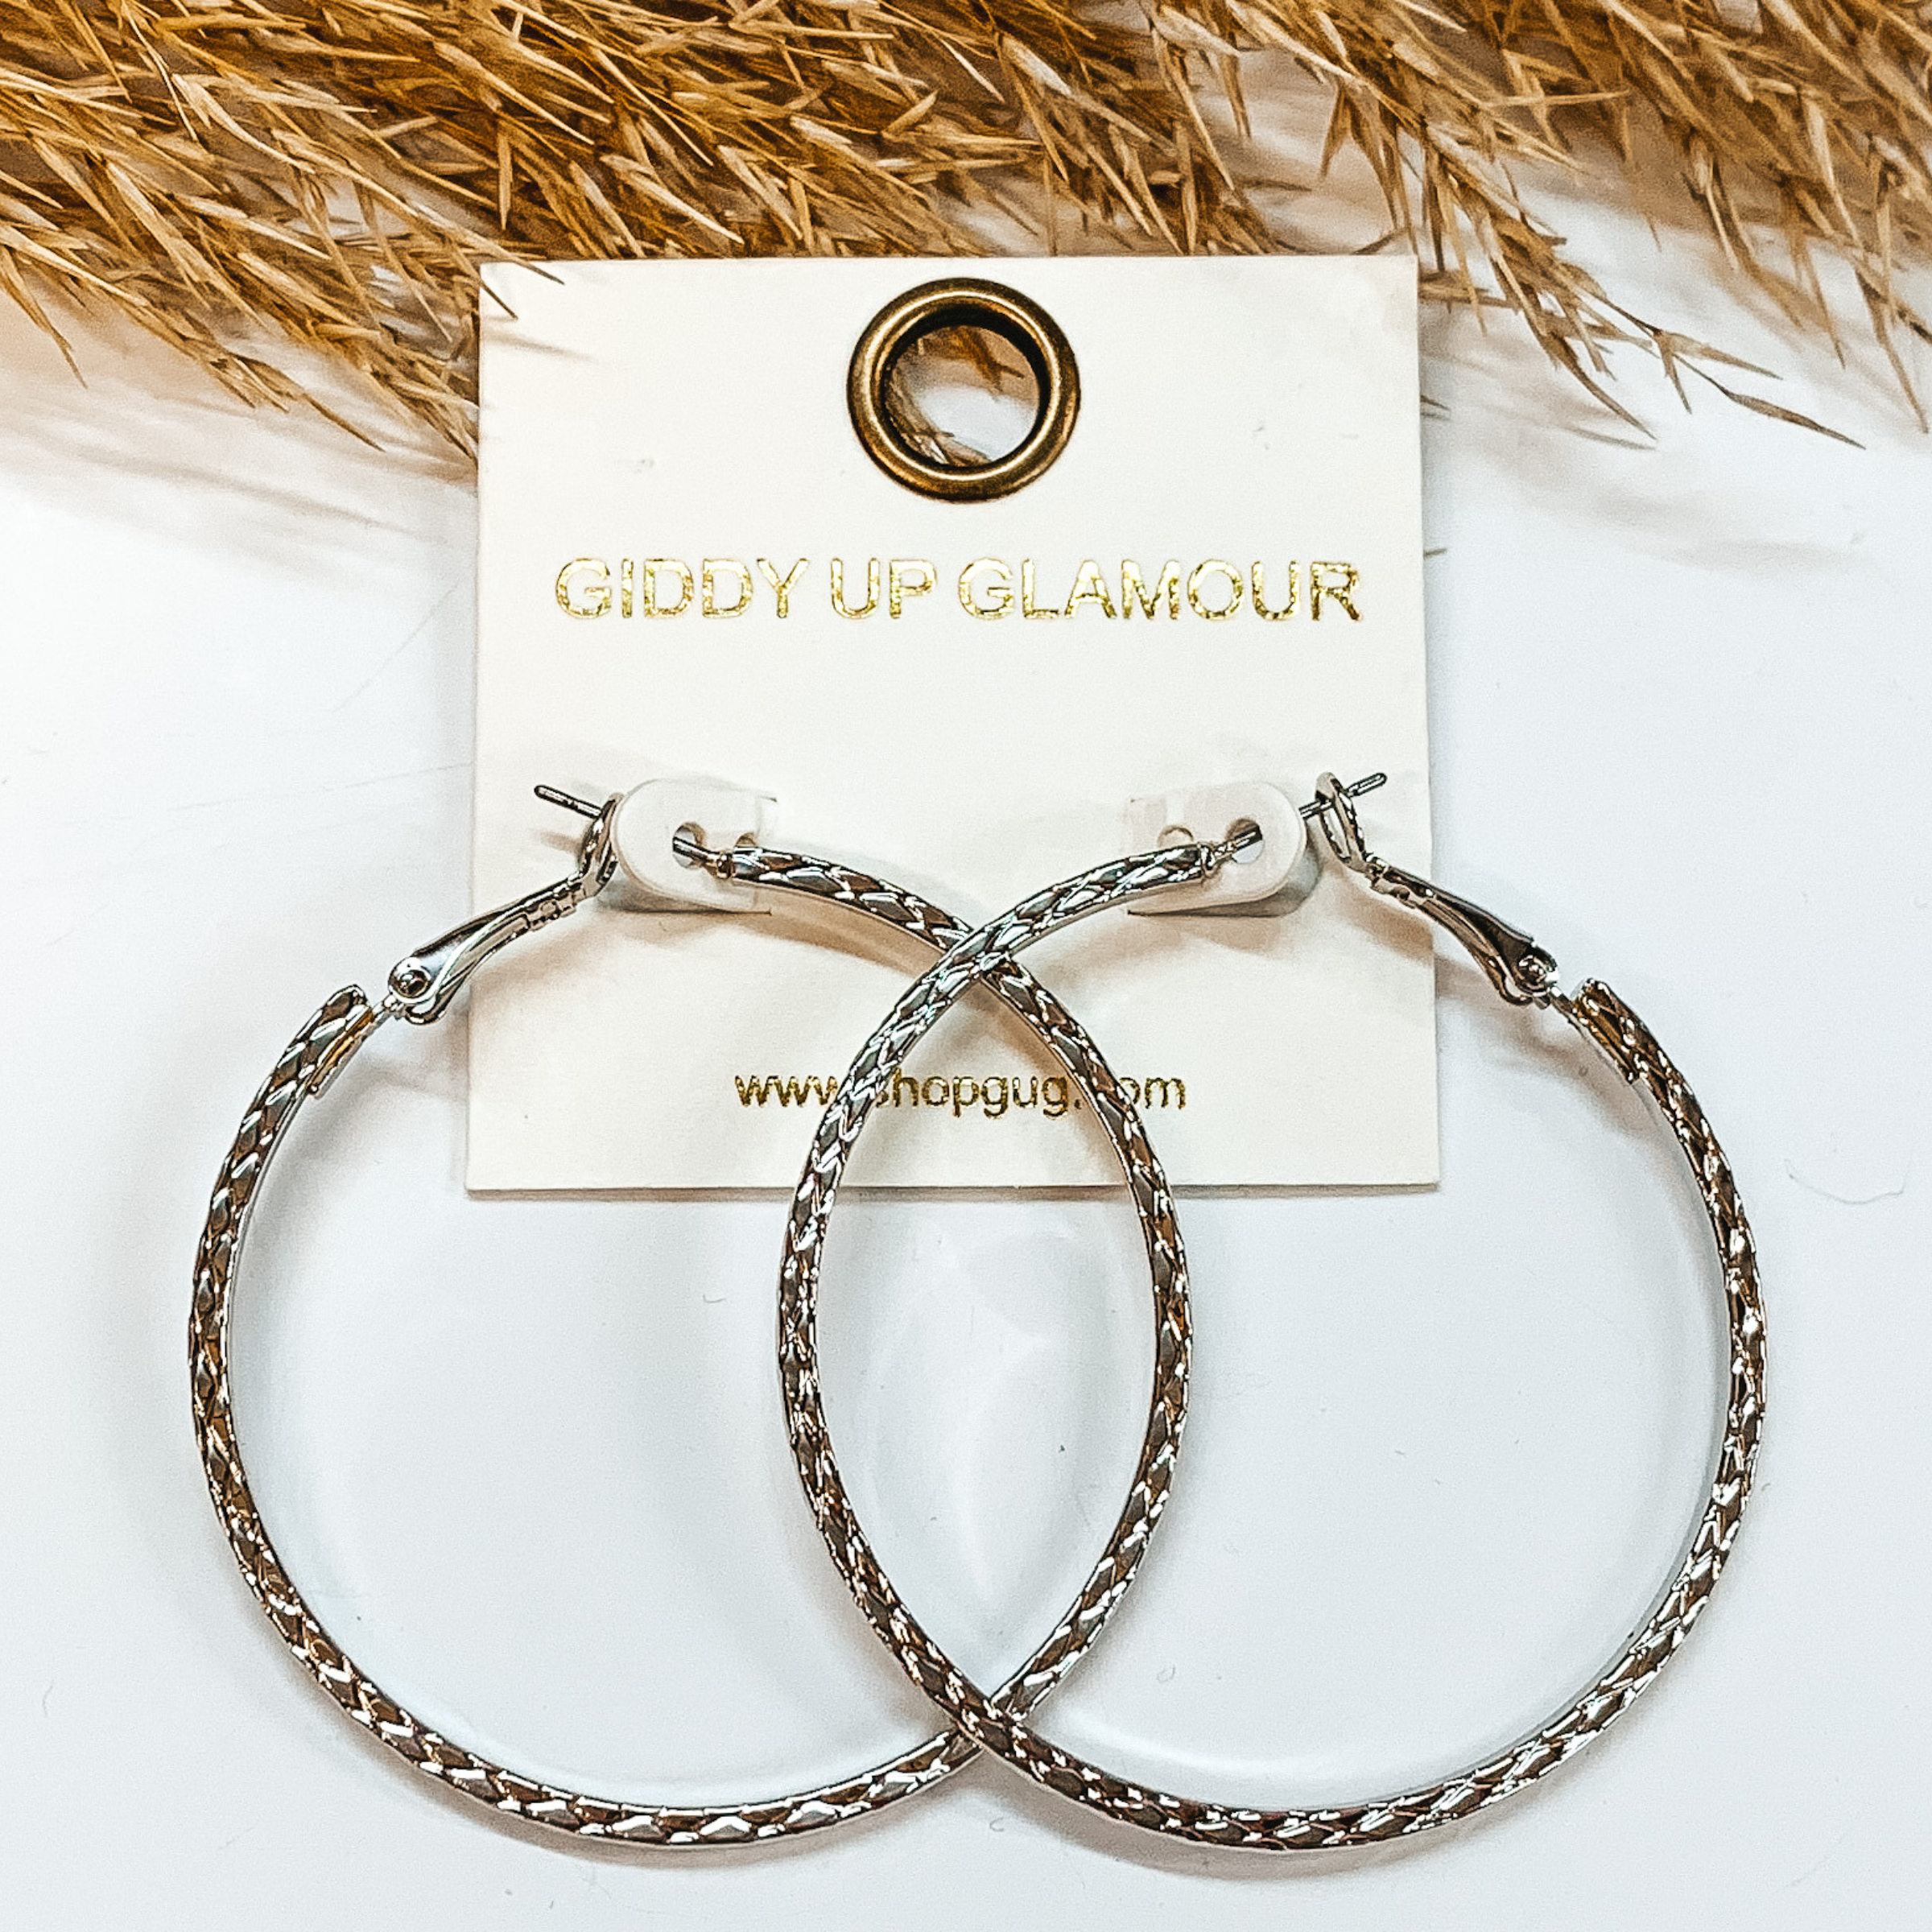 These are diamond textured silver hoops. Taken in a white background with a brown plant as  decor.